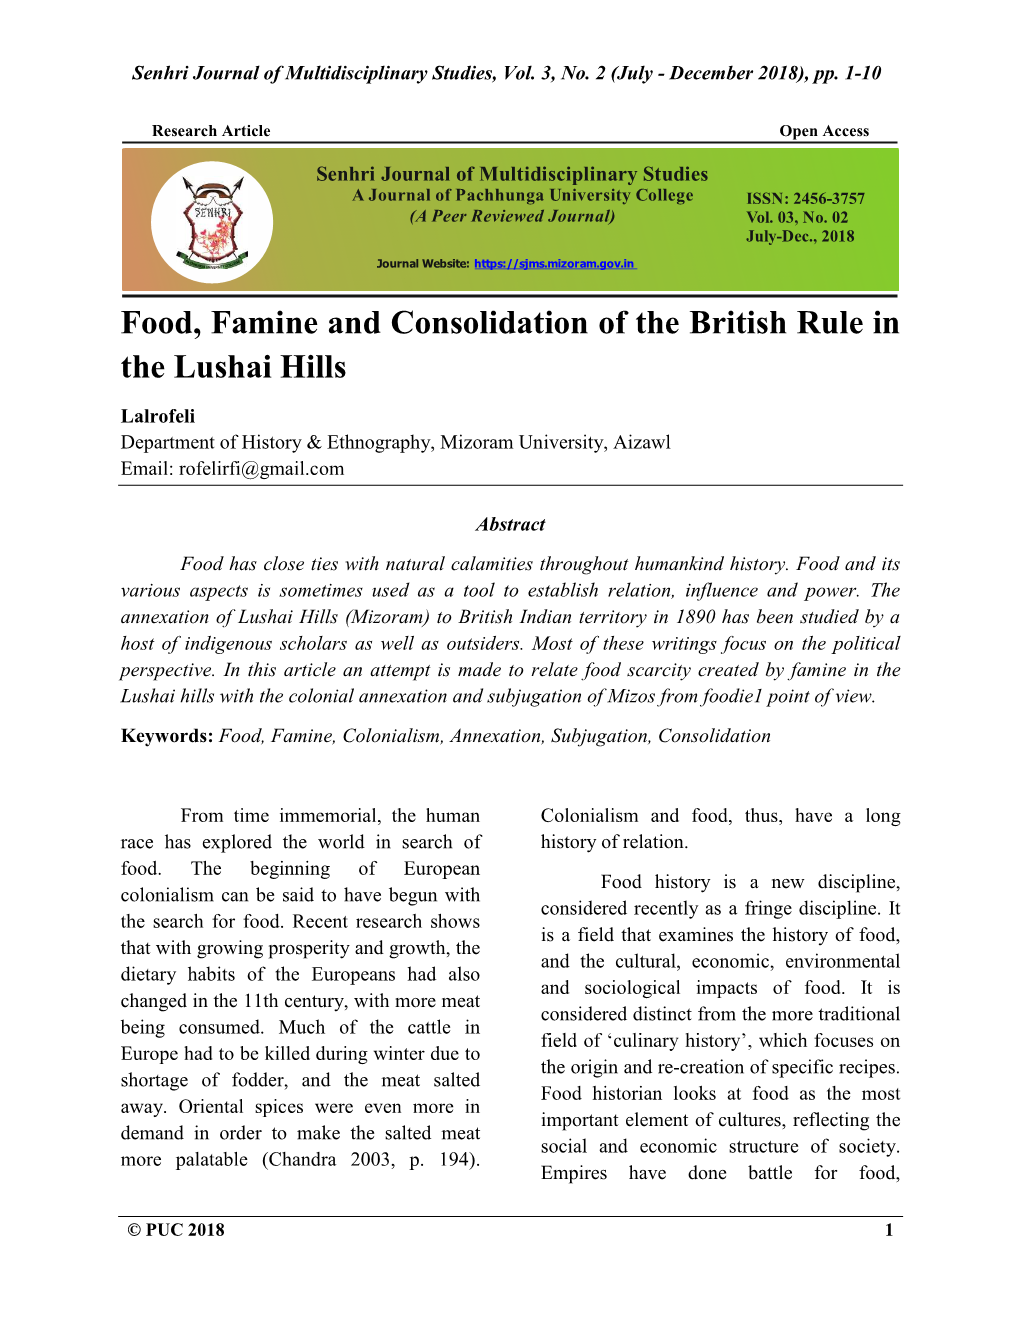 Food, Famine and Consolidation of the British Rule in the Lushai Hills